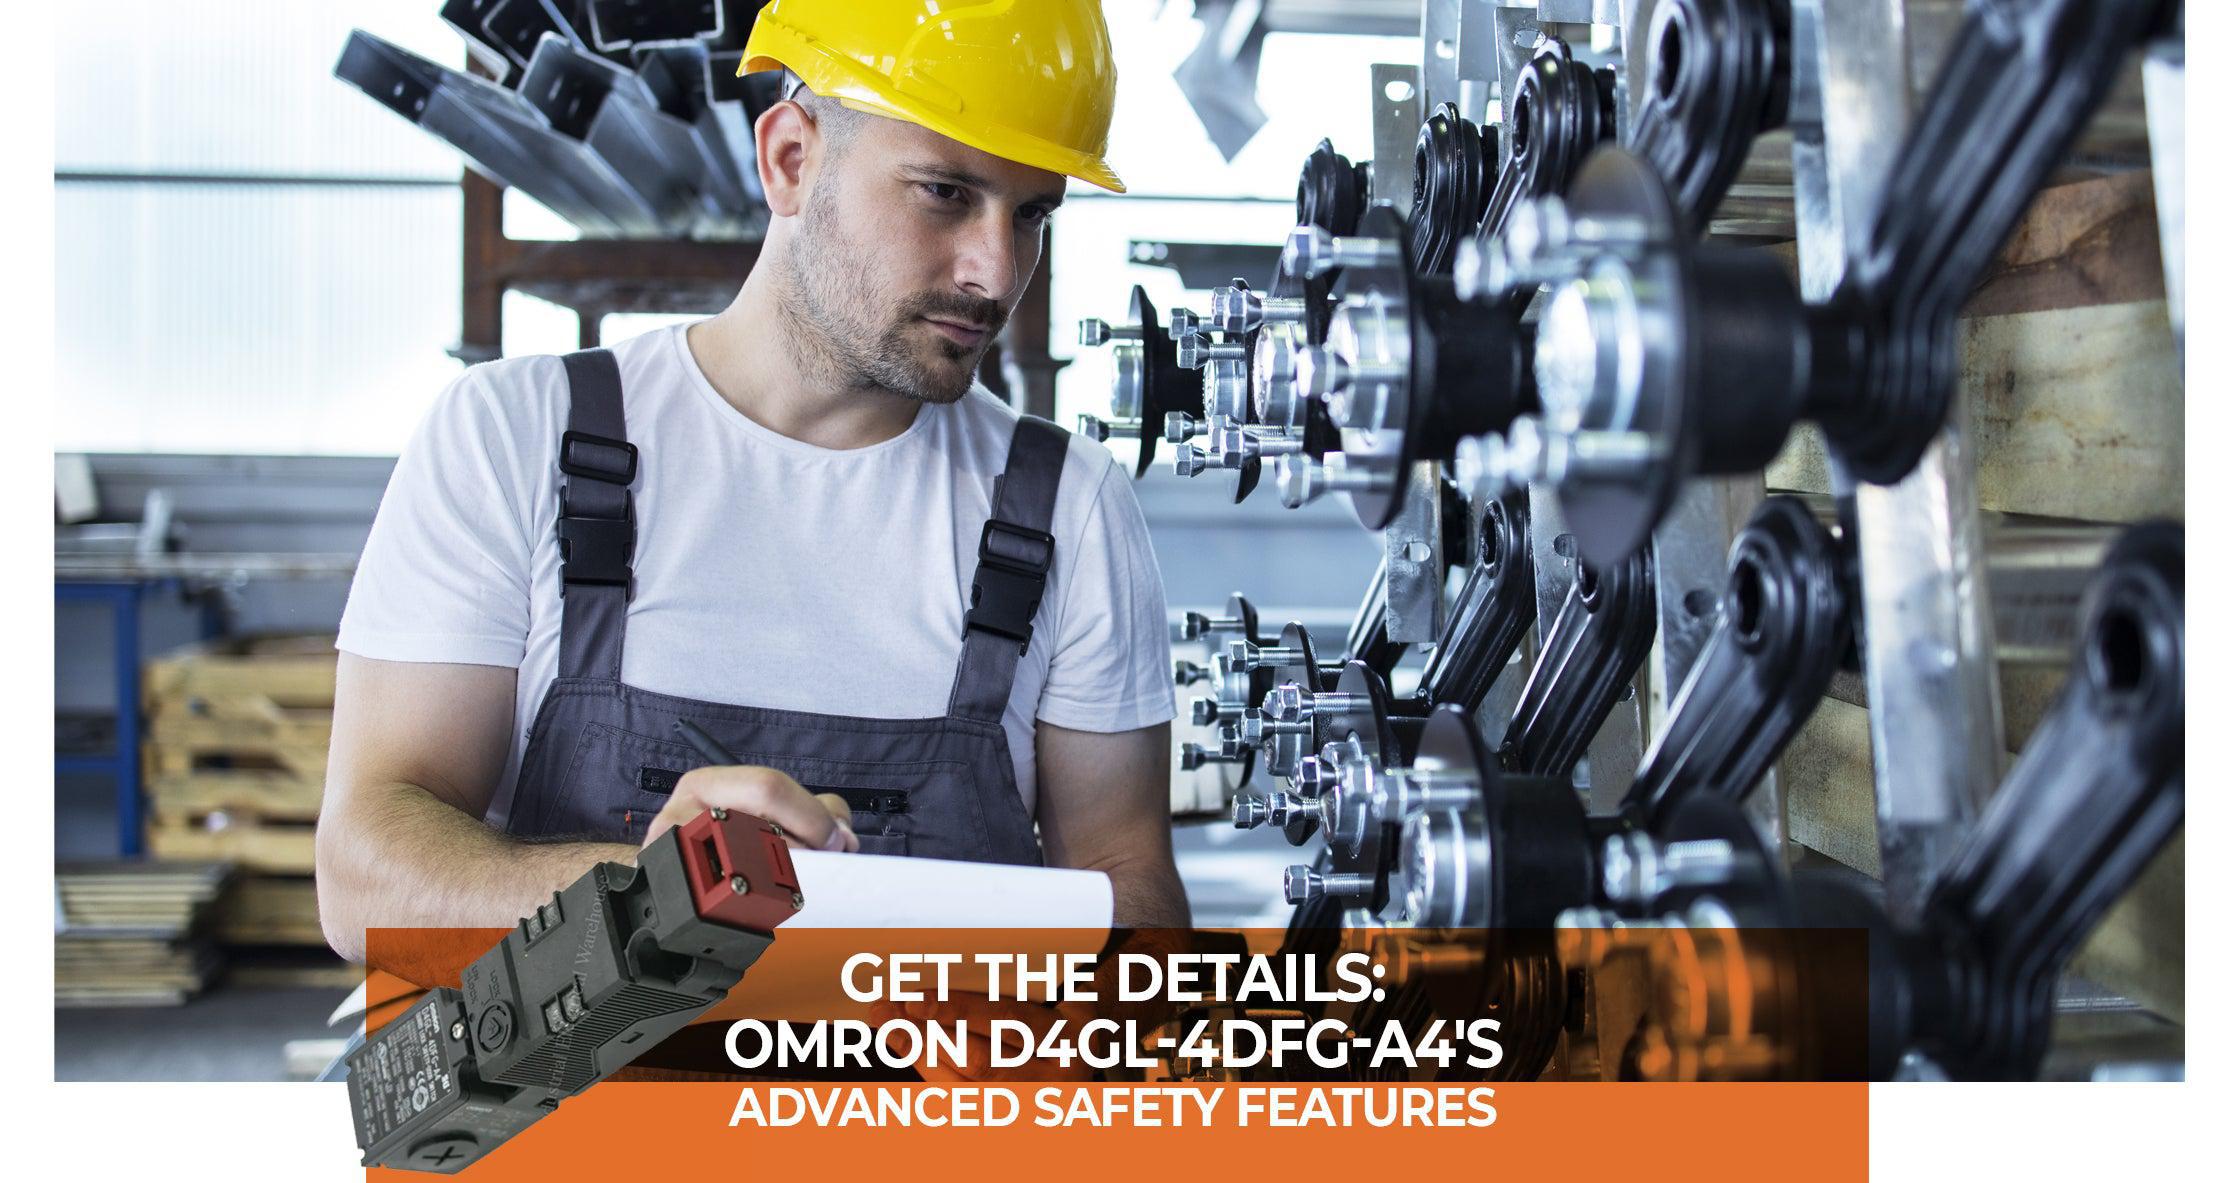 Focused technician with yellow helmet checks Omron D4GL-4DFG-A4 safety switch in industrial setting